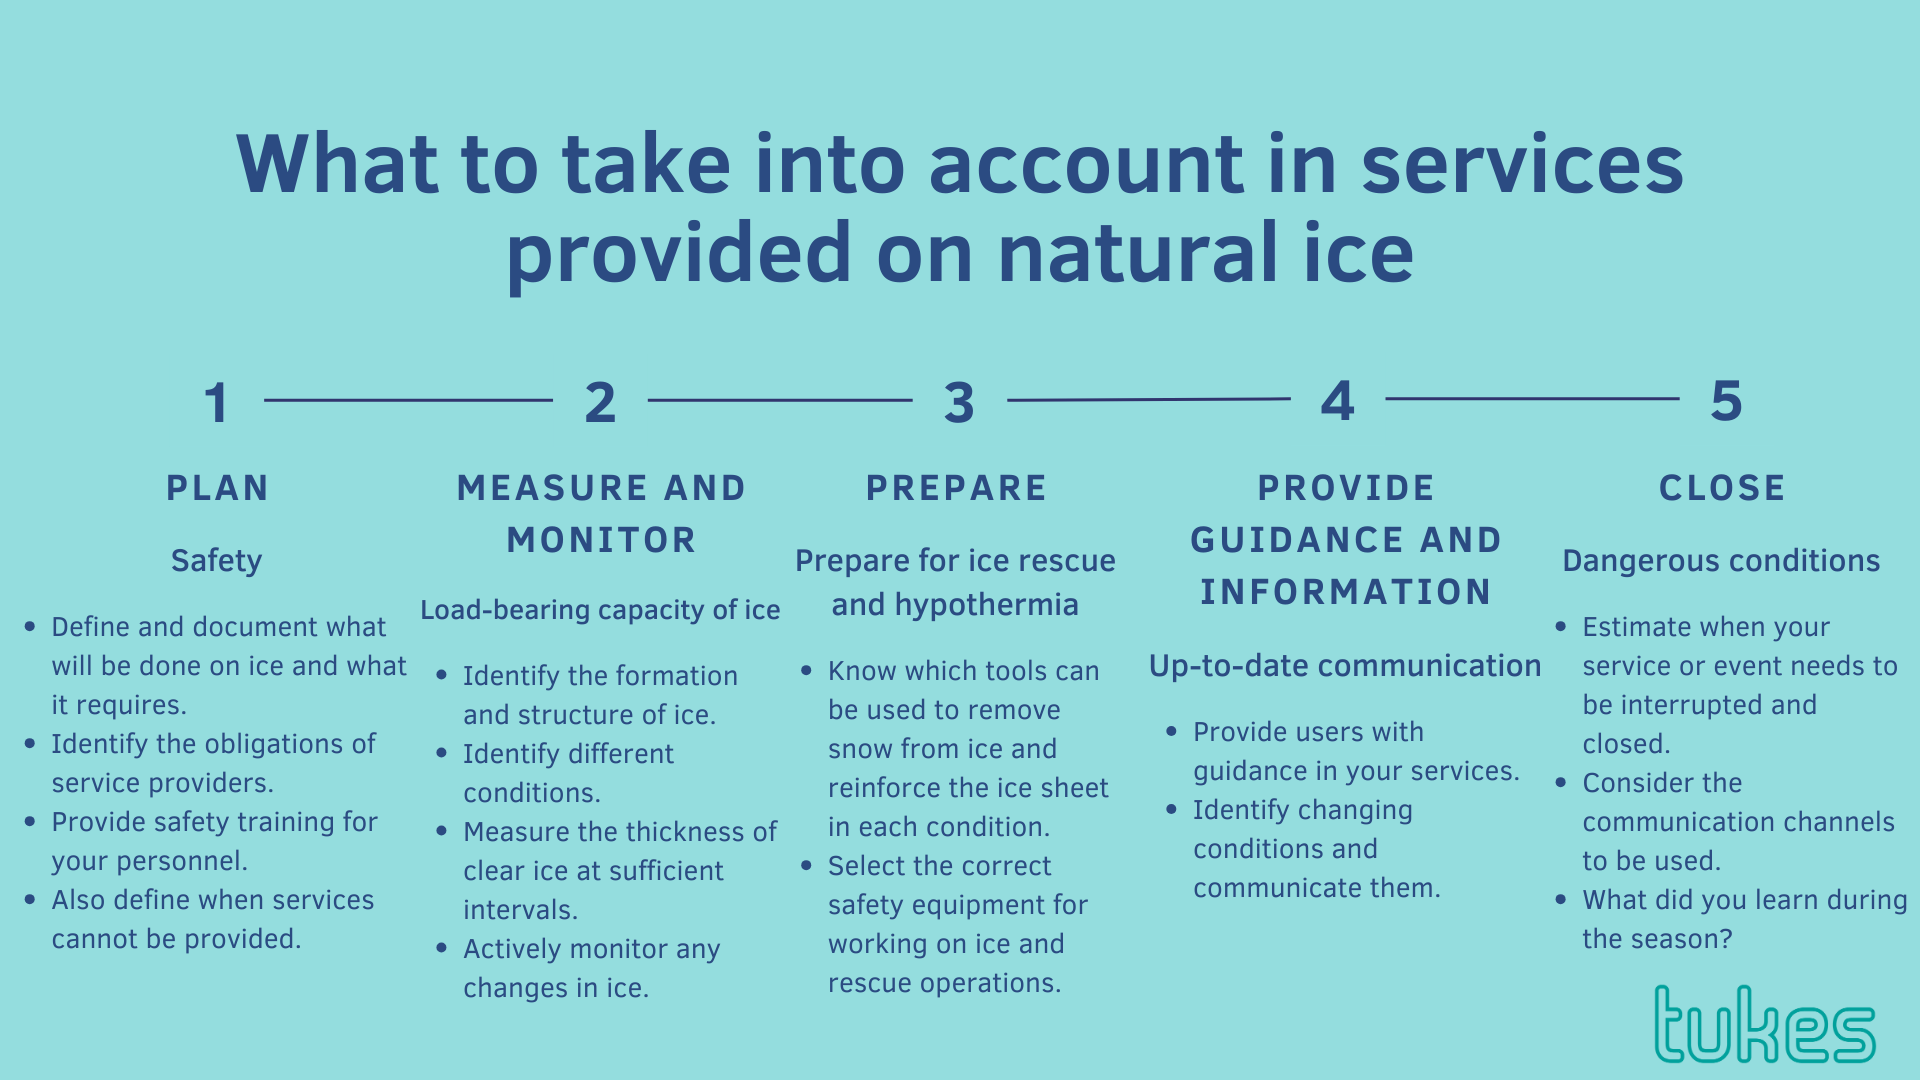 What to take into account in services provided on natural ice: plan safety, measure and monitor load-bearing capacity of ice, prepare for ice rescue and hypothermia, provide guidance and information, close.